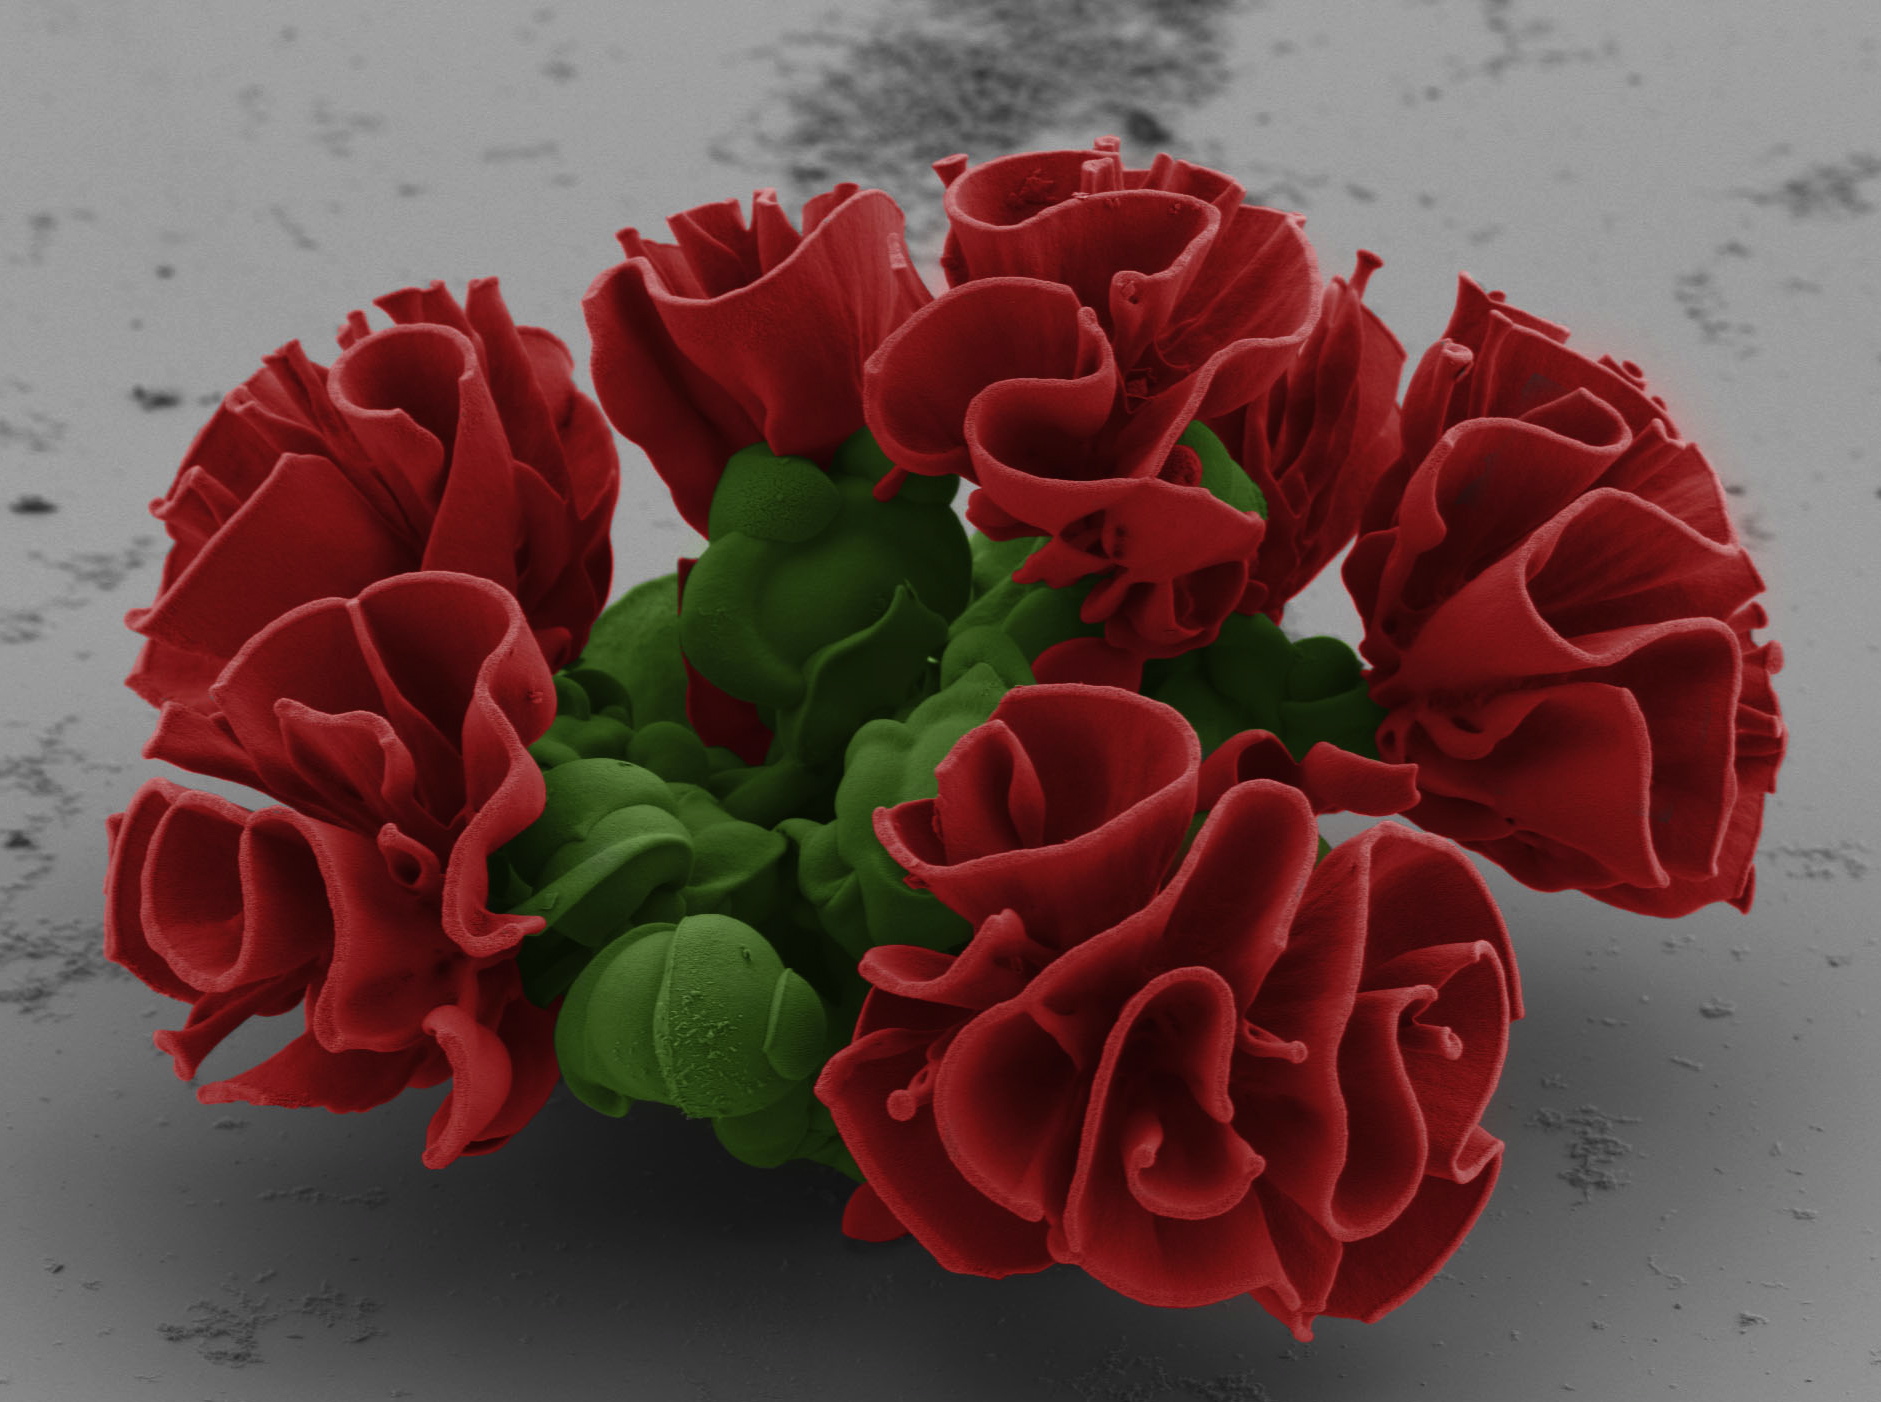 8 Tiny Sculptures You Can Only See With An Electron Microscope